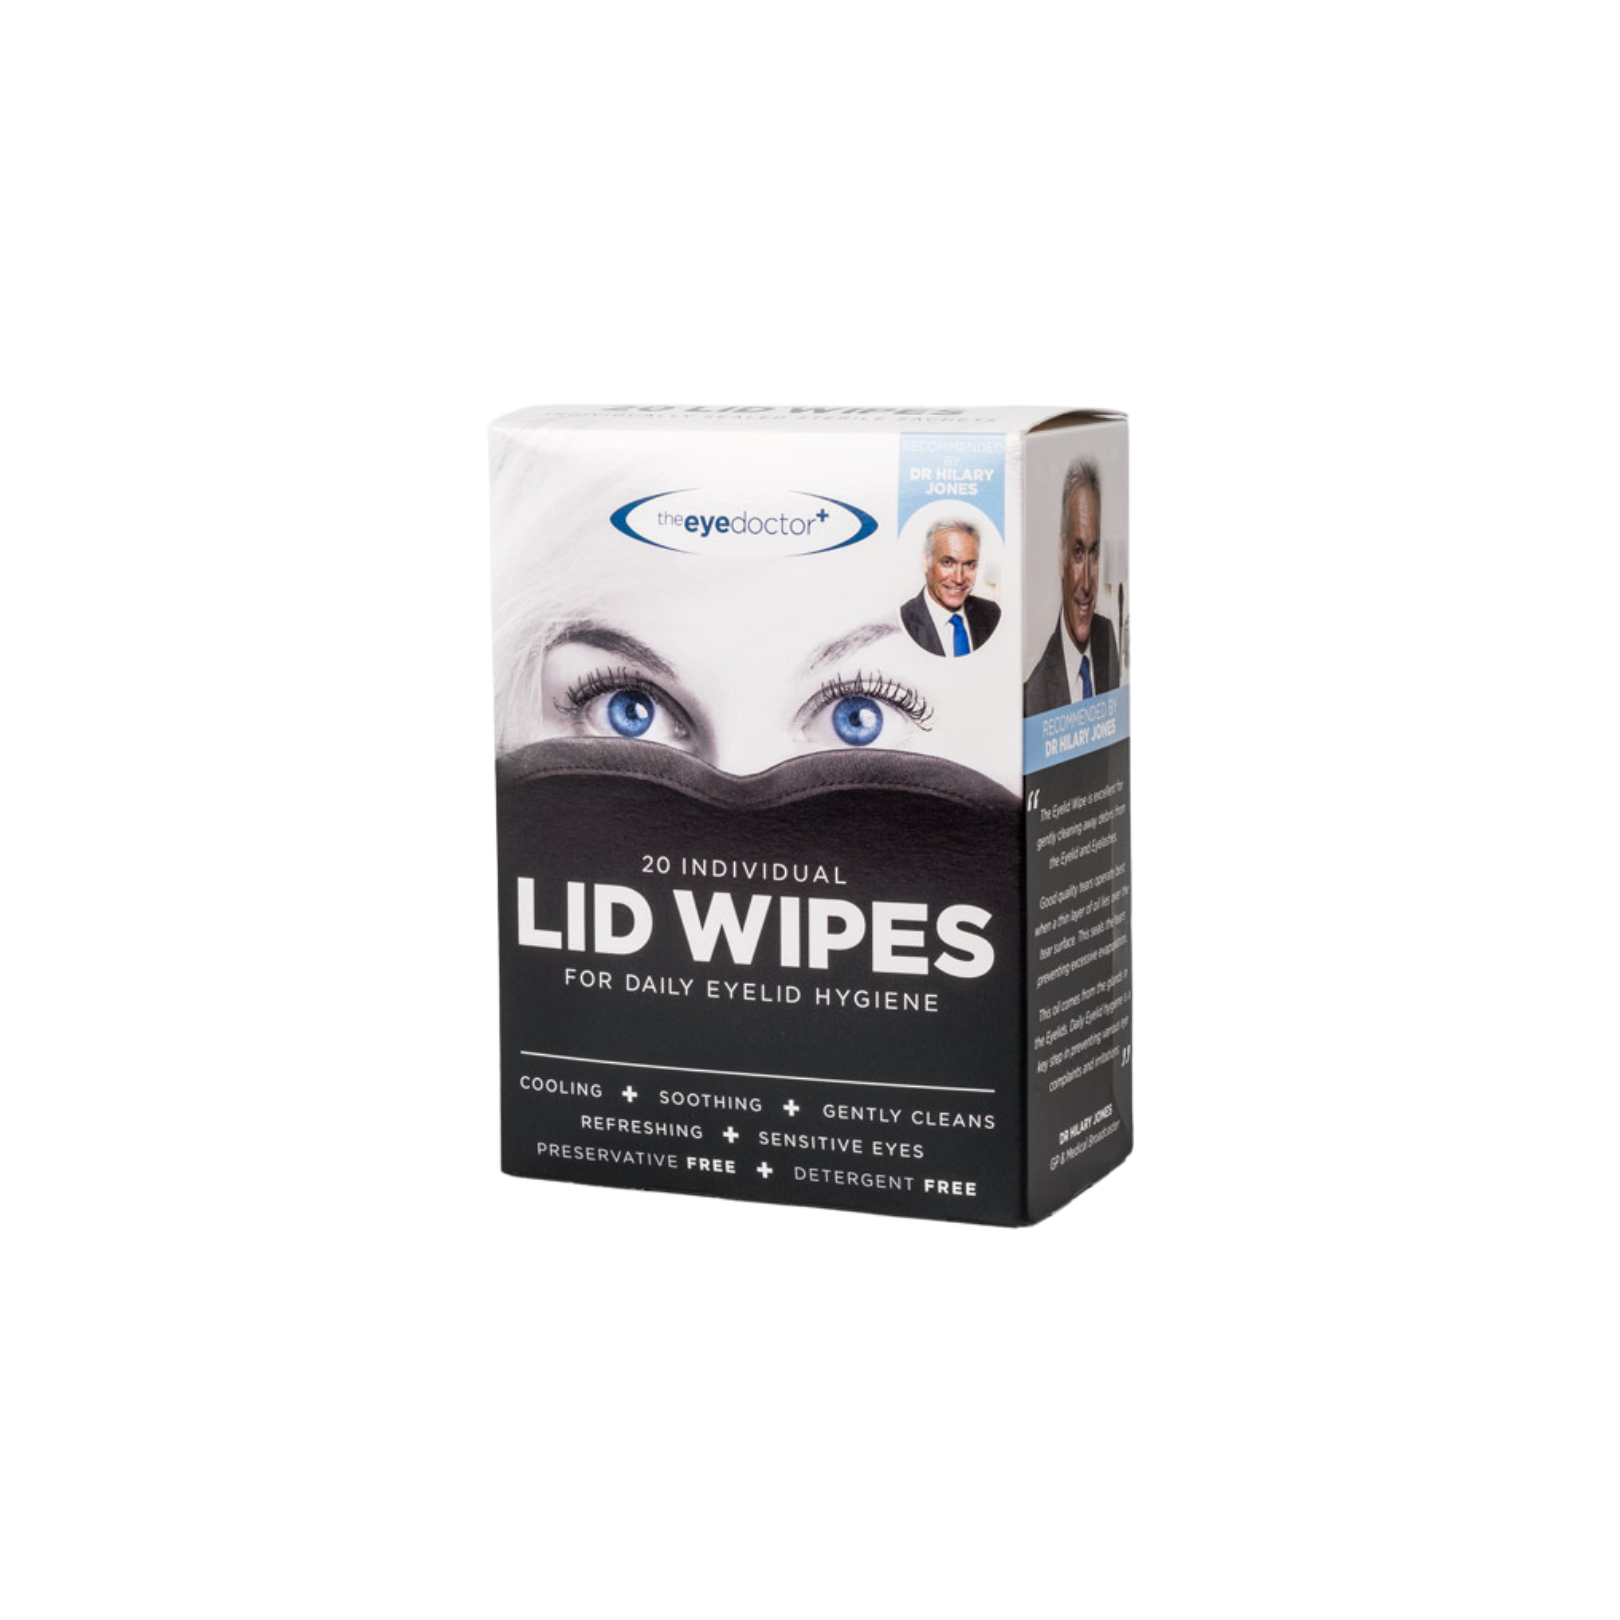 The Eye Doctor Lid Wipes - Wet wipes